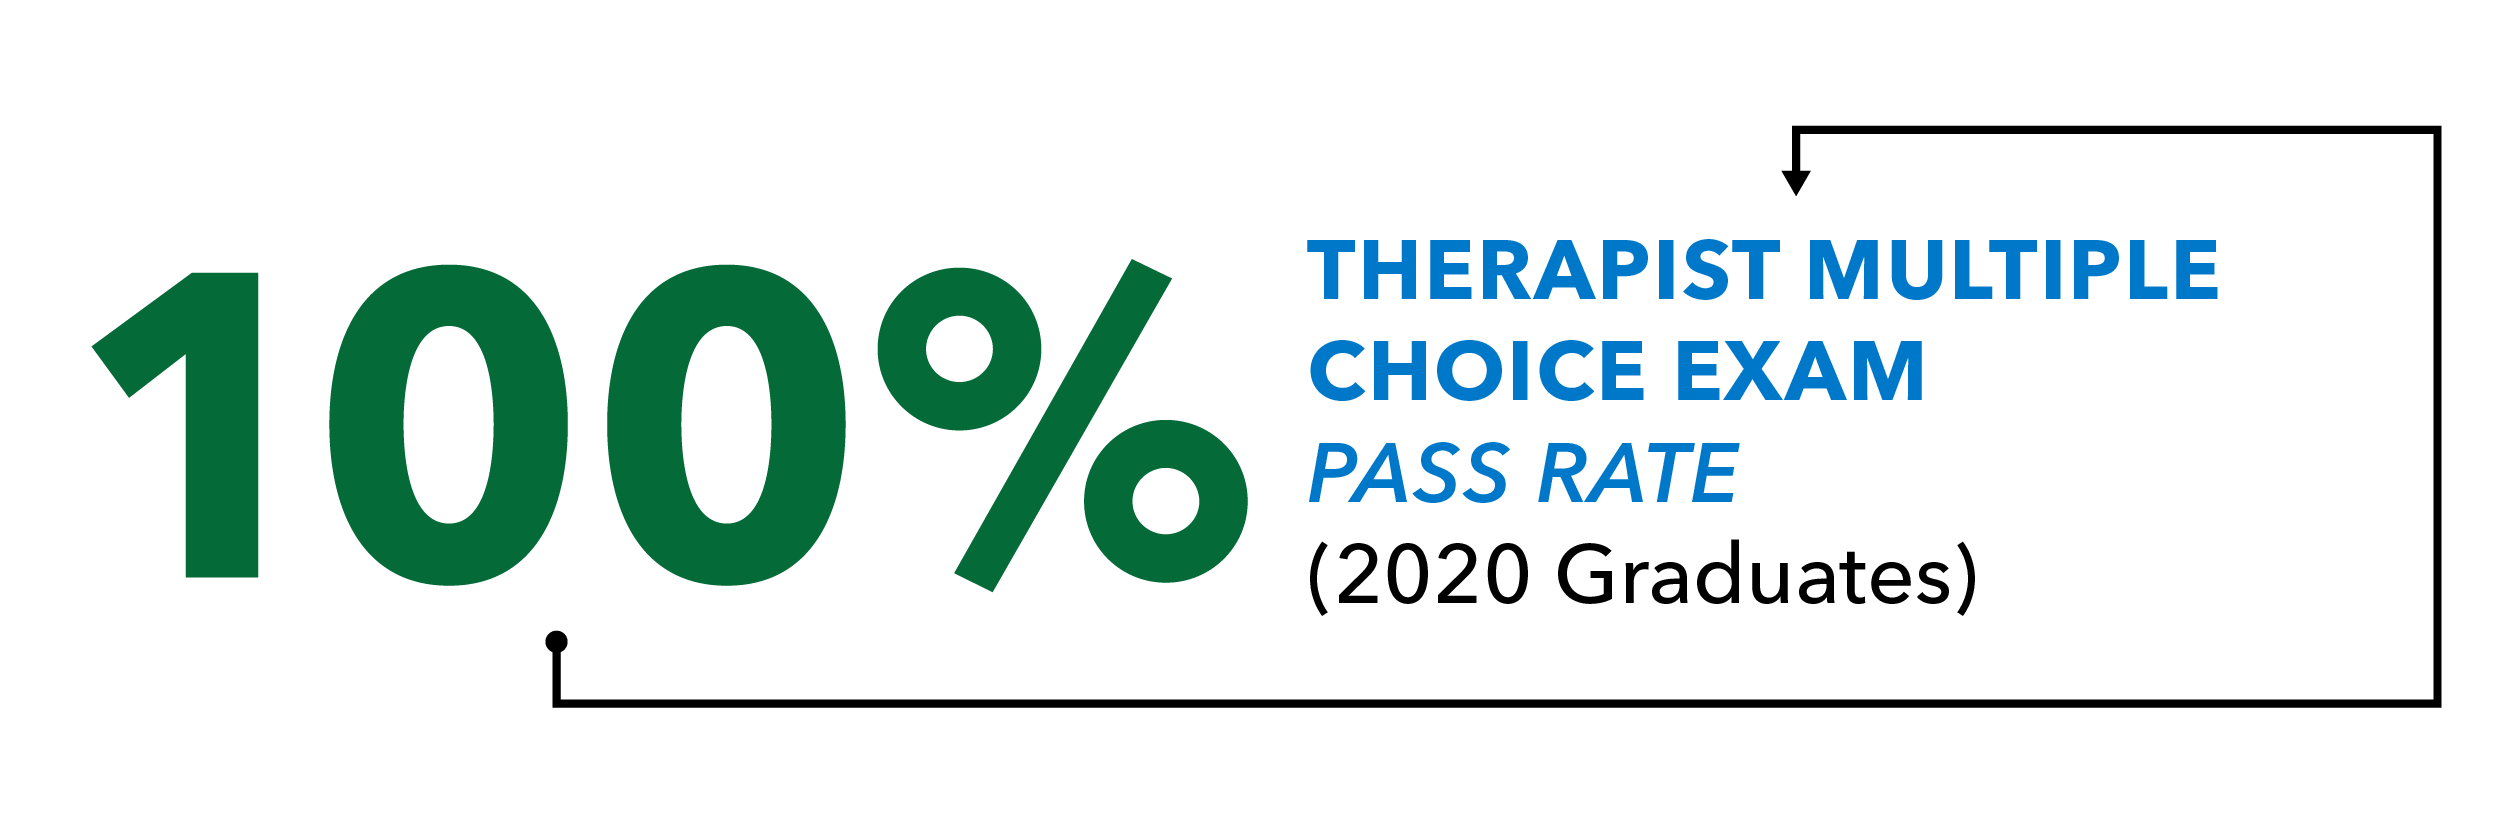 100% Therapist Multile Choice Exam Pass Rate